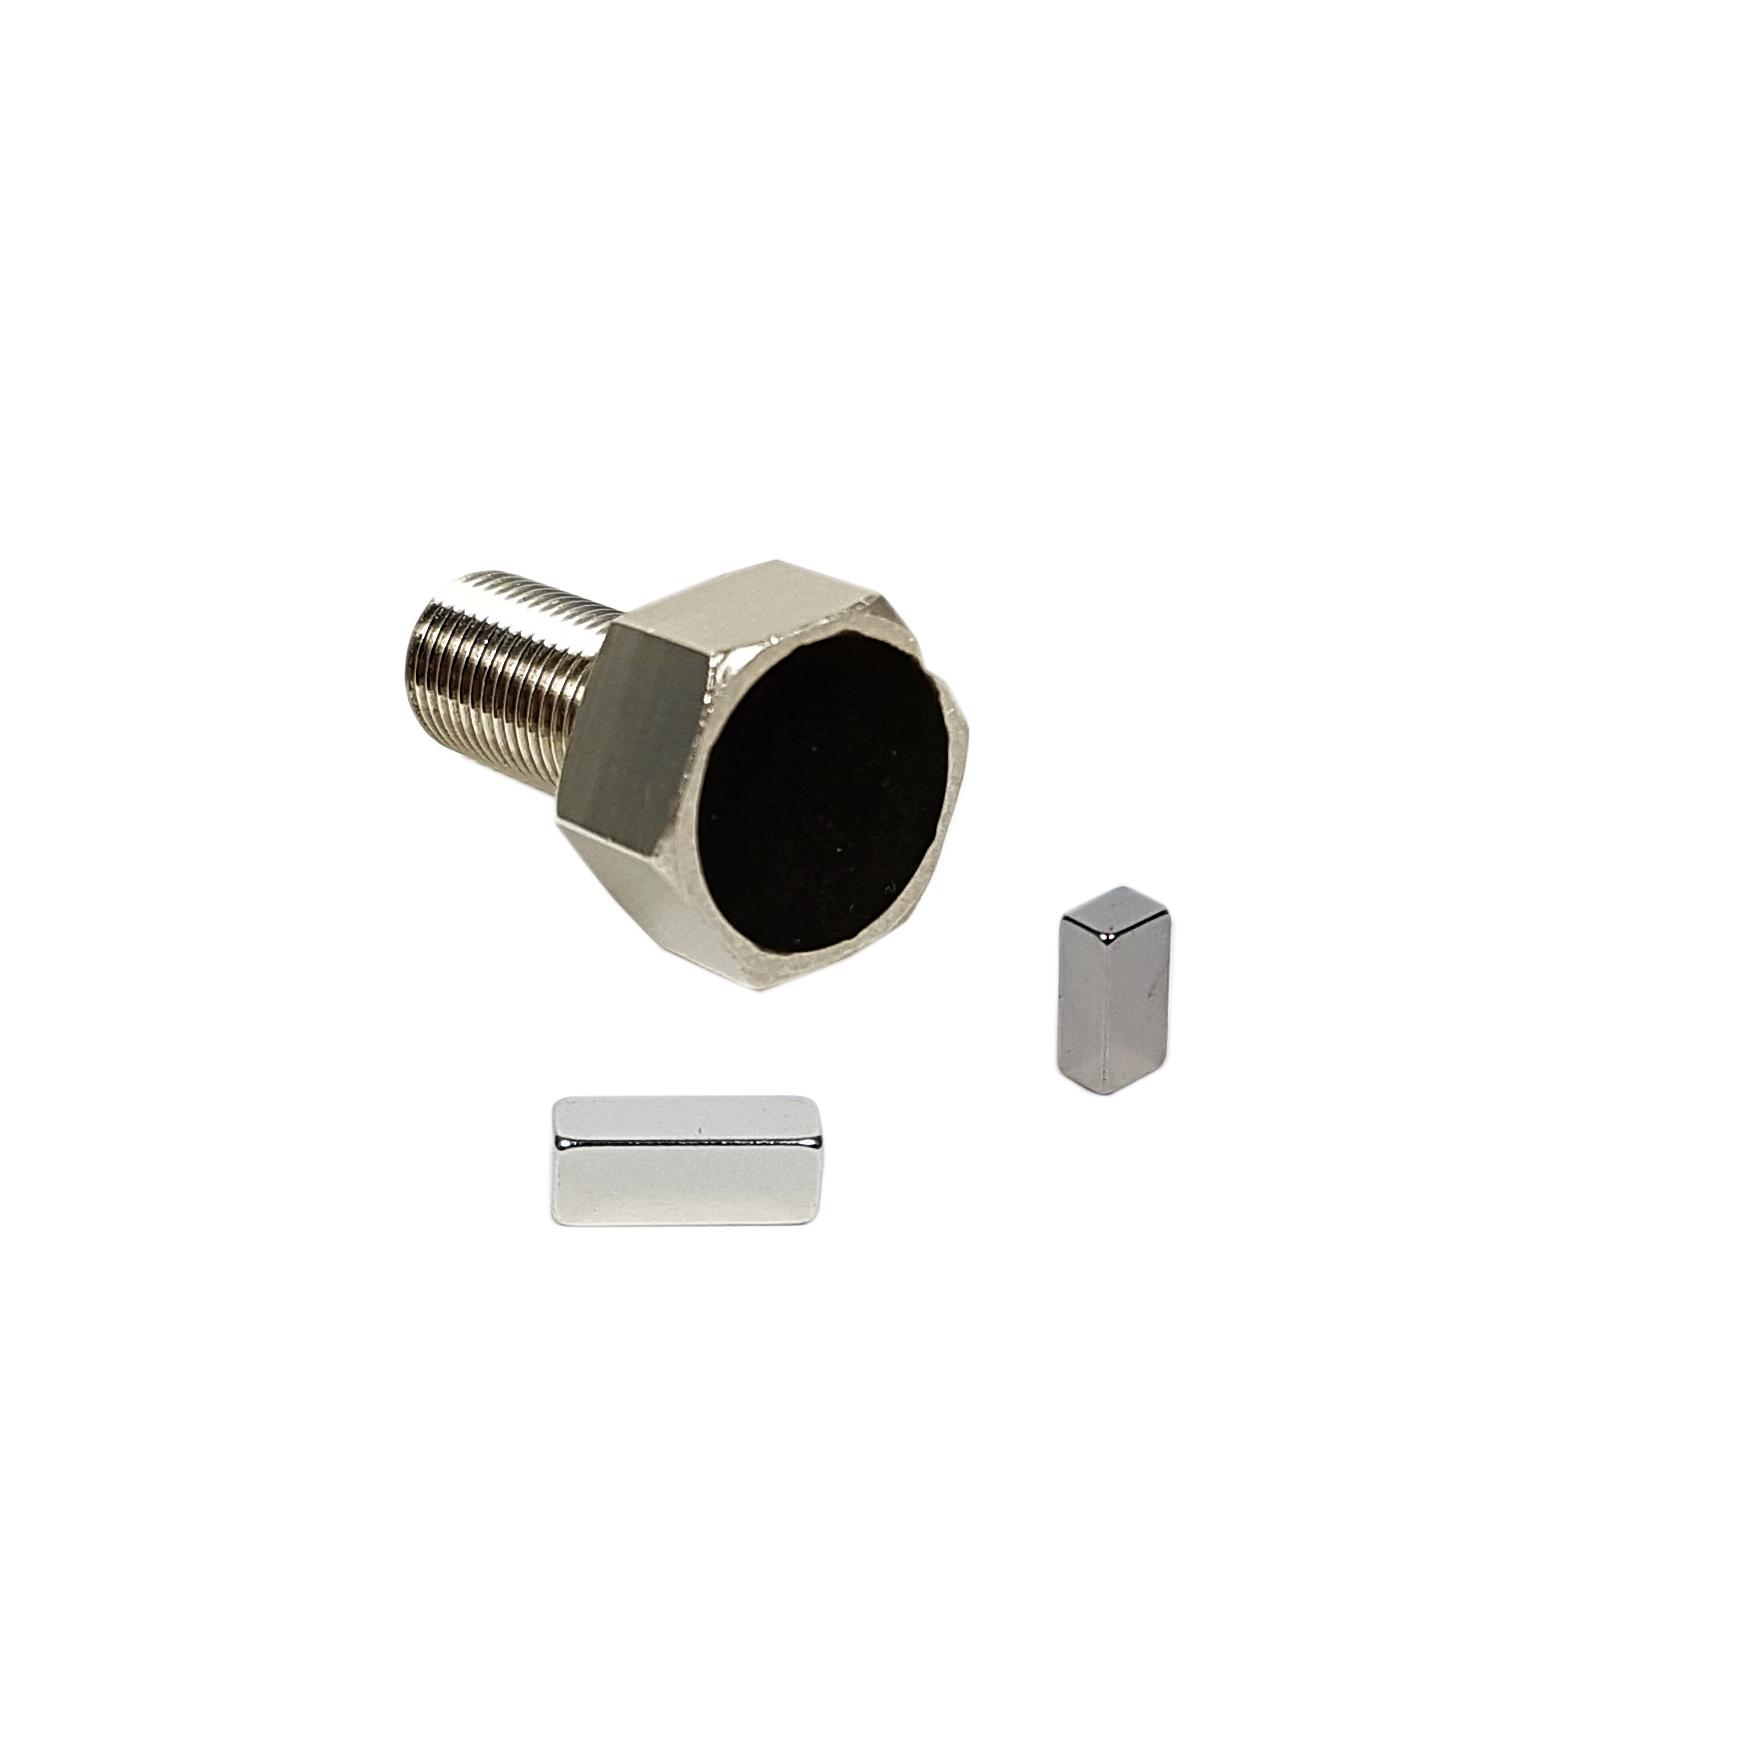 【XPK M10 MAGNET-02】MAGNET FOR ROTARY POSITION SENSO